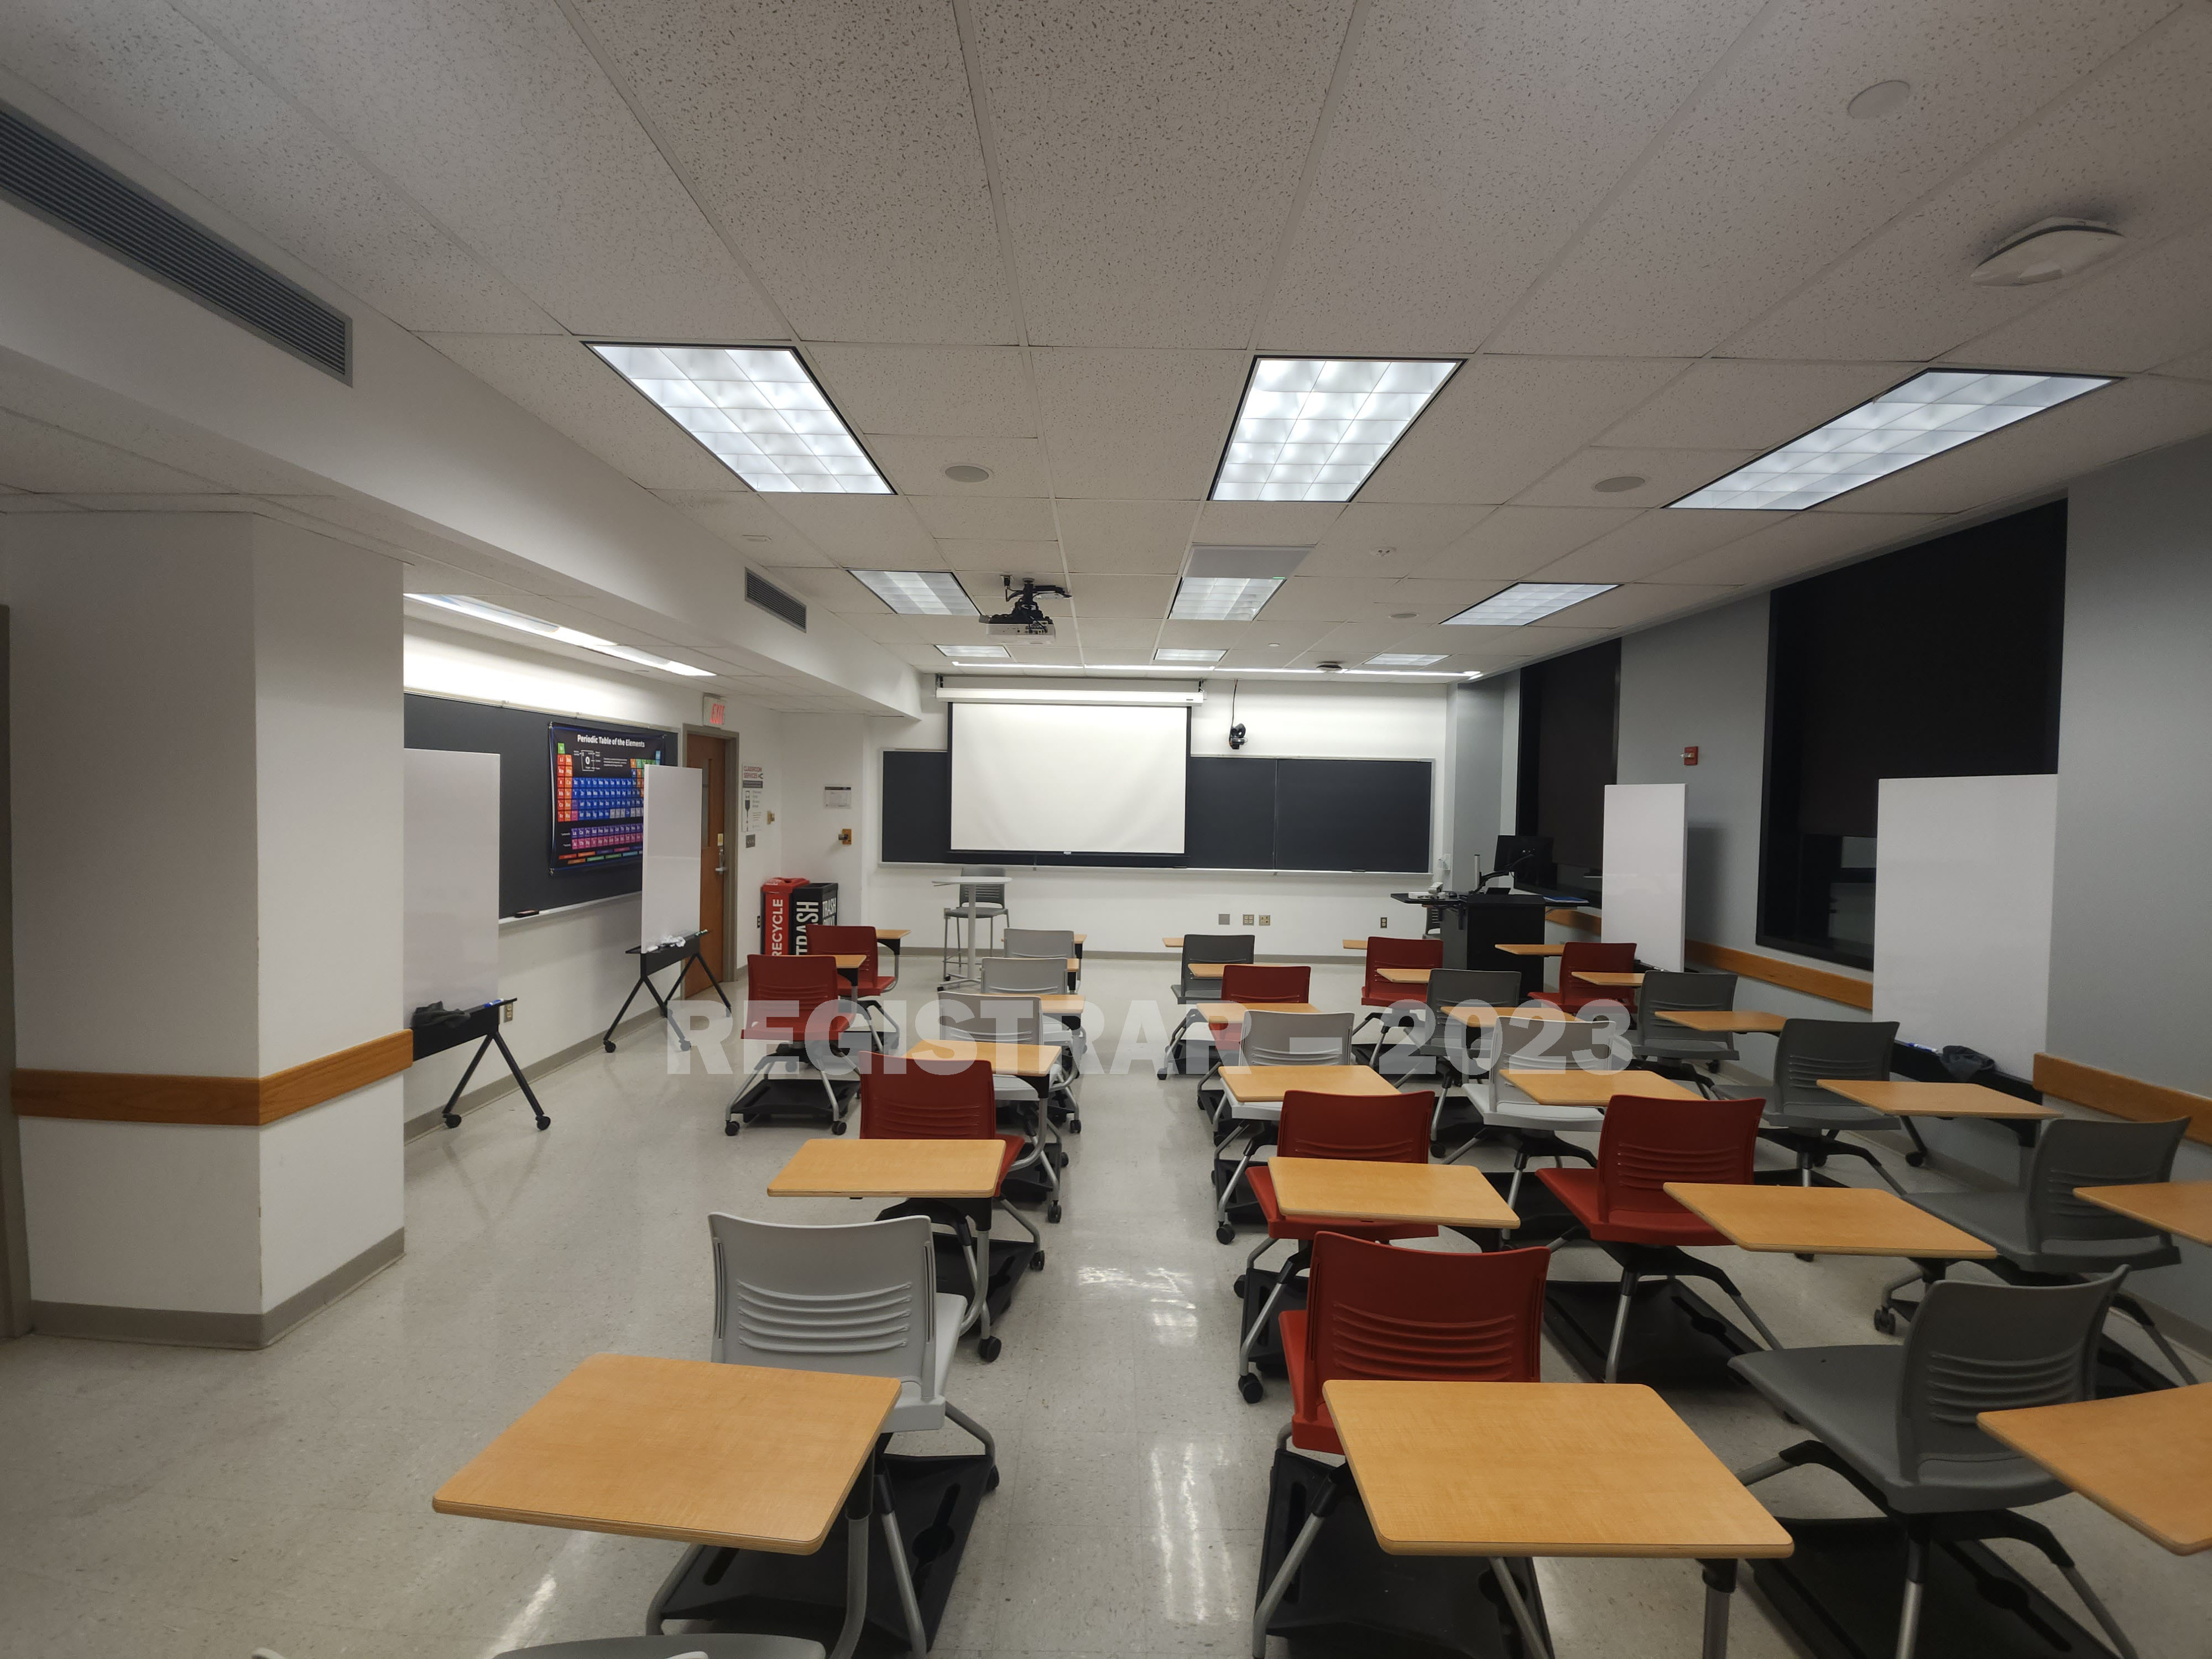 McPherson Chemical Lab room 1035 ultra wide view from the back of the room with the projection screen down